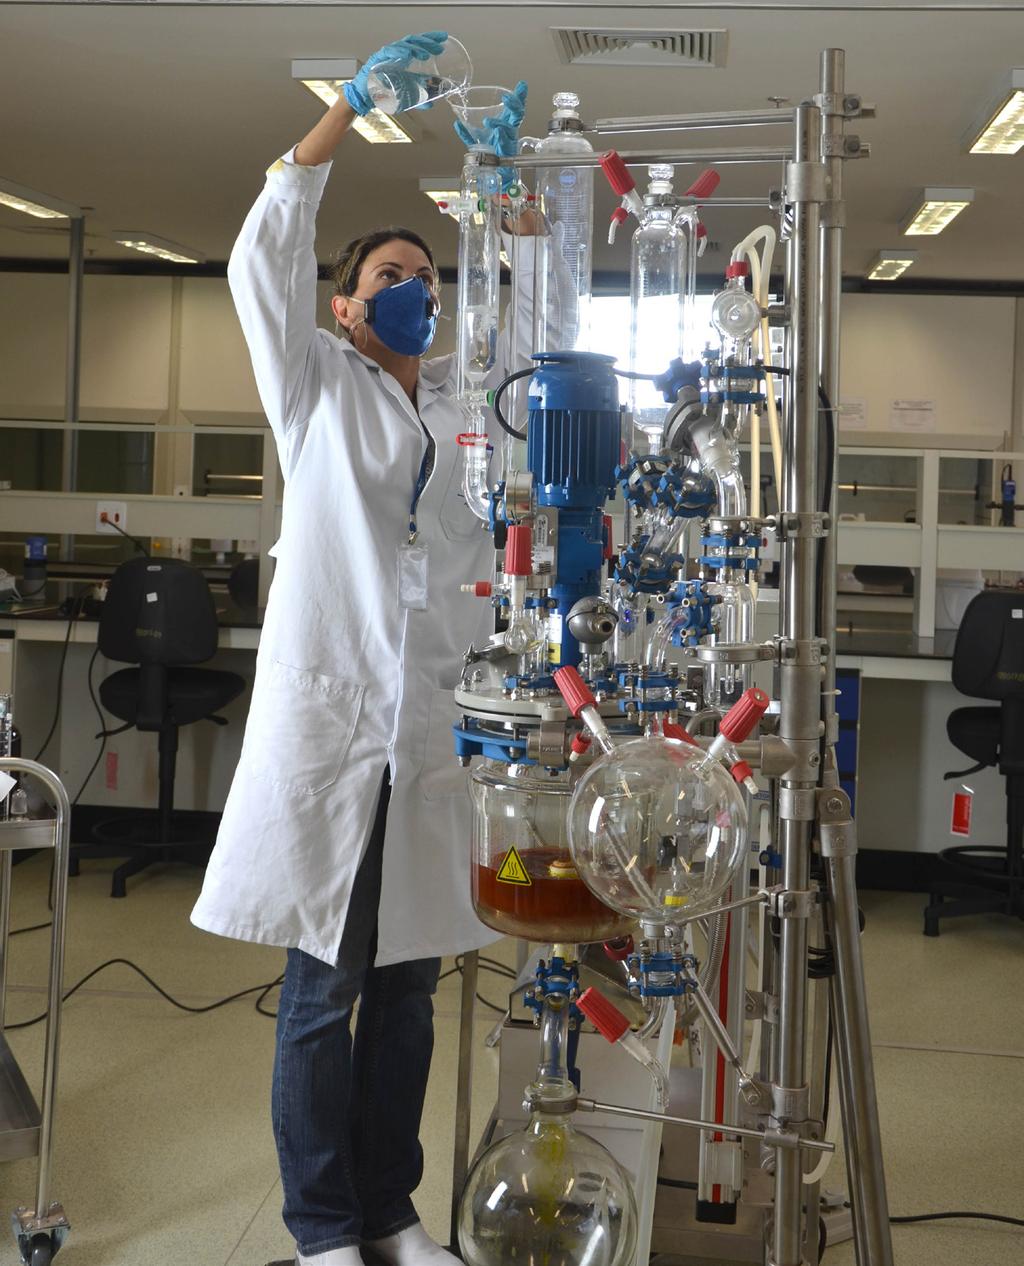 Chemical Processes Laboratory (LPQ) At LPQ research projects are conducted to add value to biomass, and agricultural and agro-industrial wastes, through compaction, esterification,